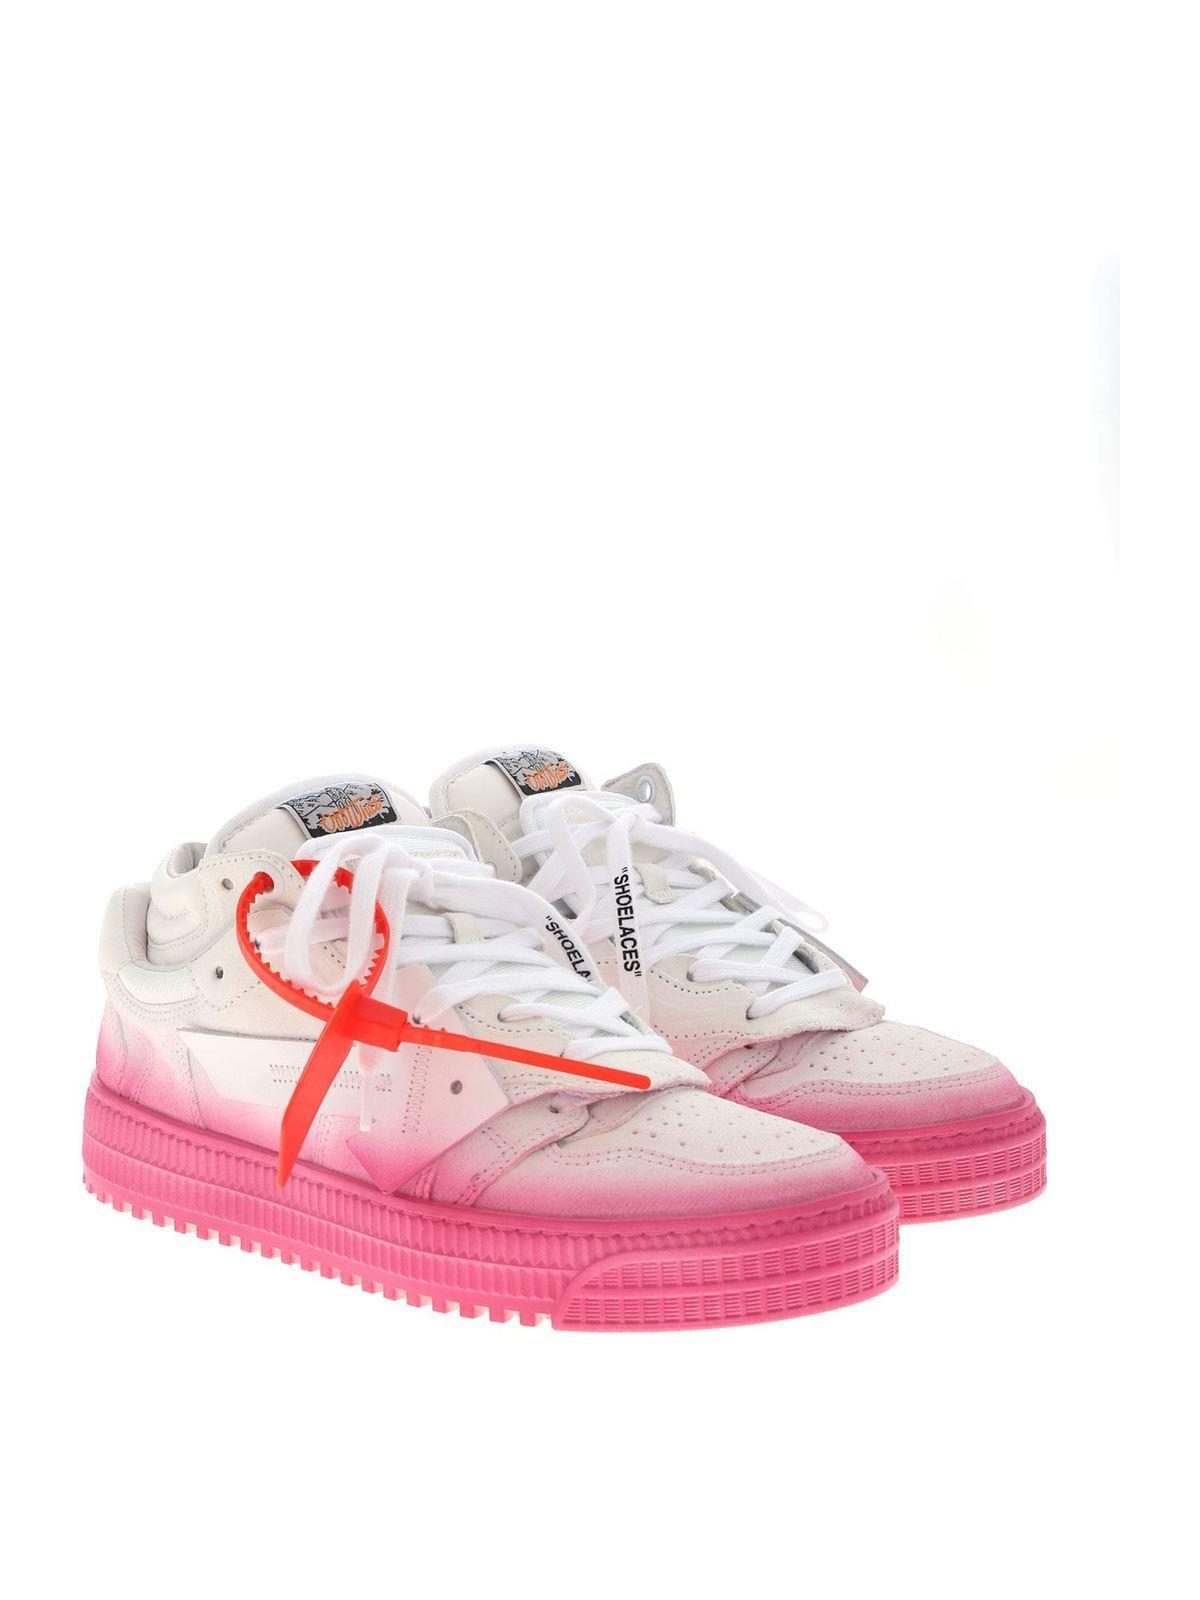 Off-White c/o Virgil Abloh Suede Low 30 Sneakers In Degrade Fuchsia in ...